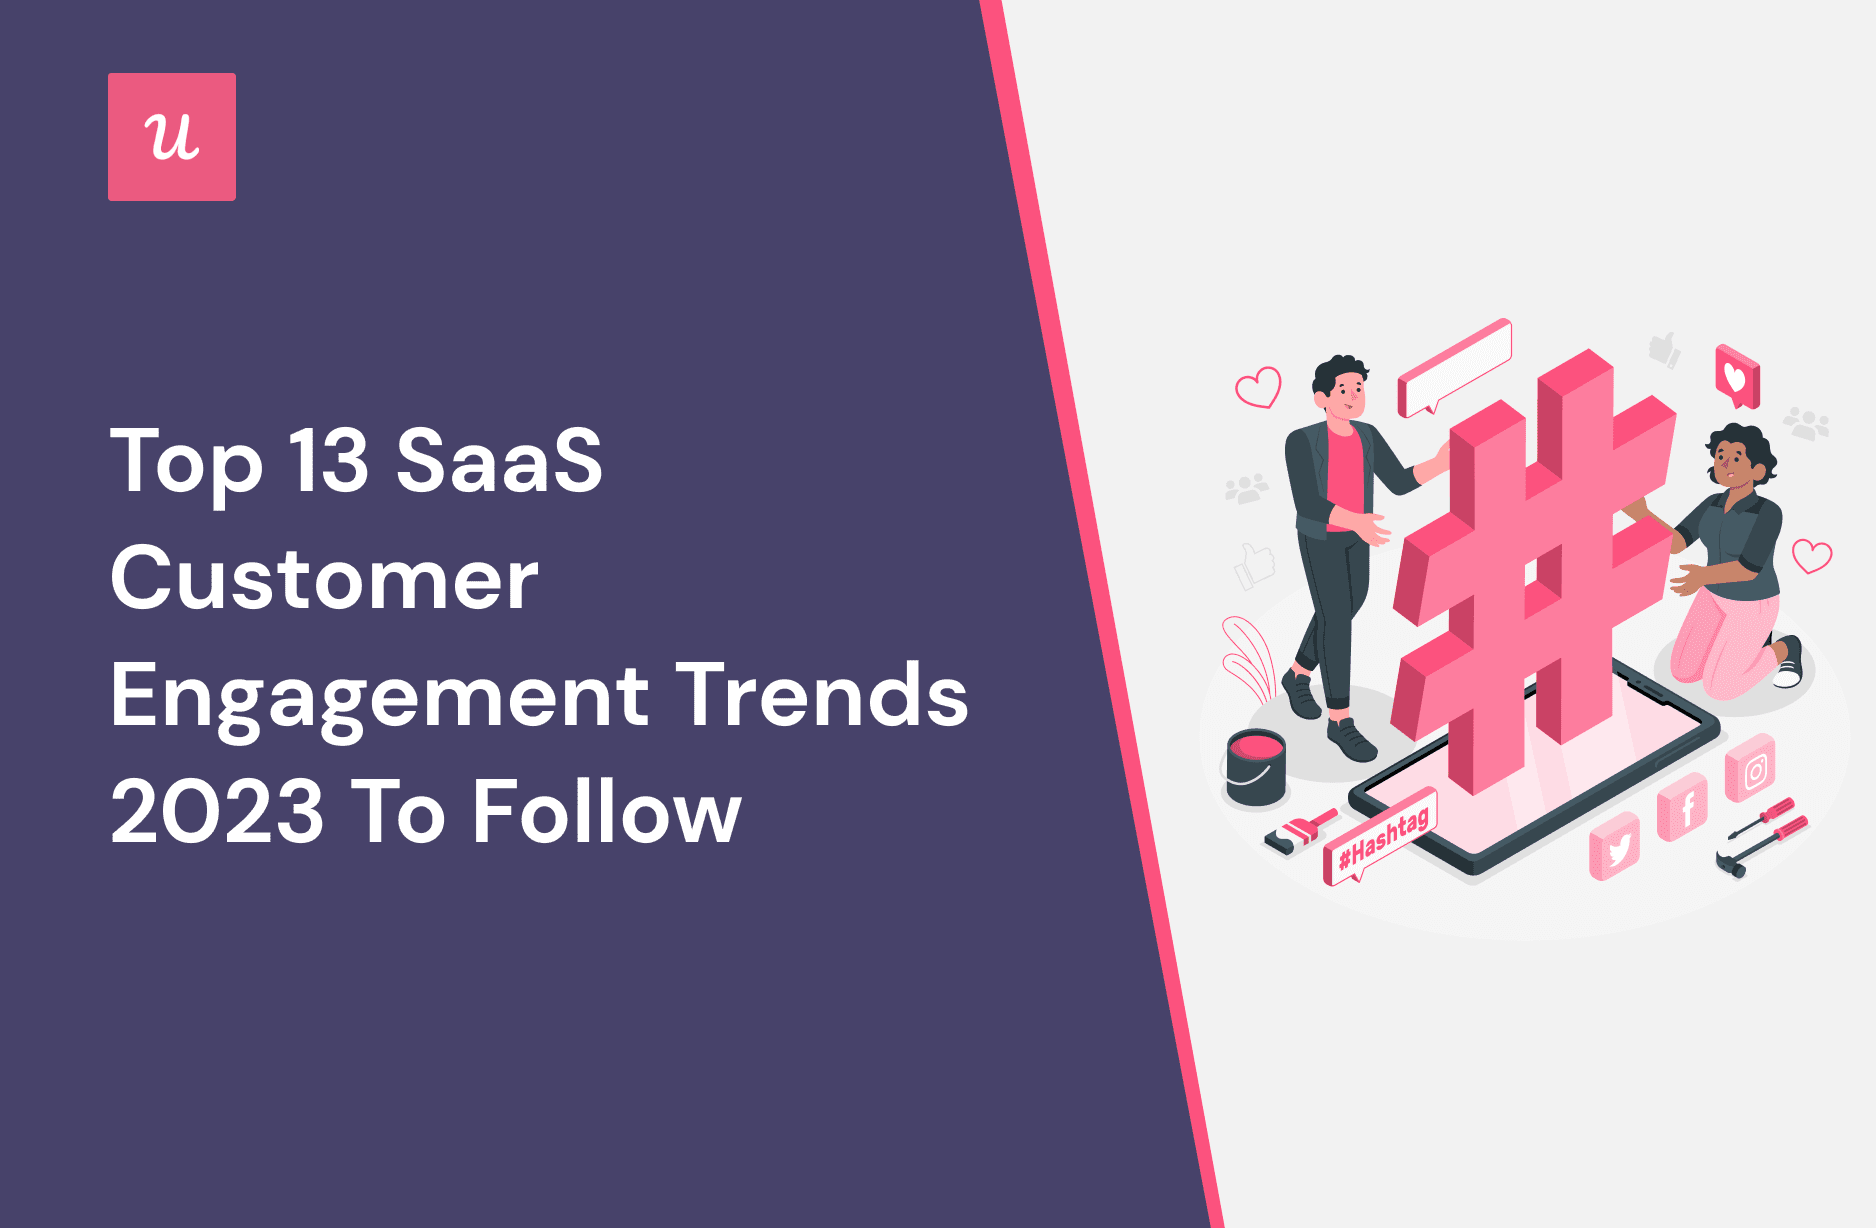 Top 13 SaaS Customer Engagement Trends 2023 to Follow cover